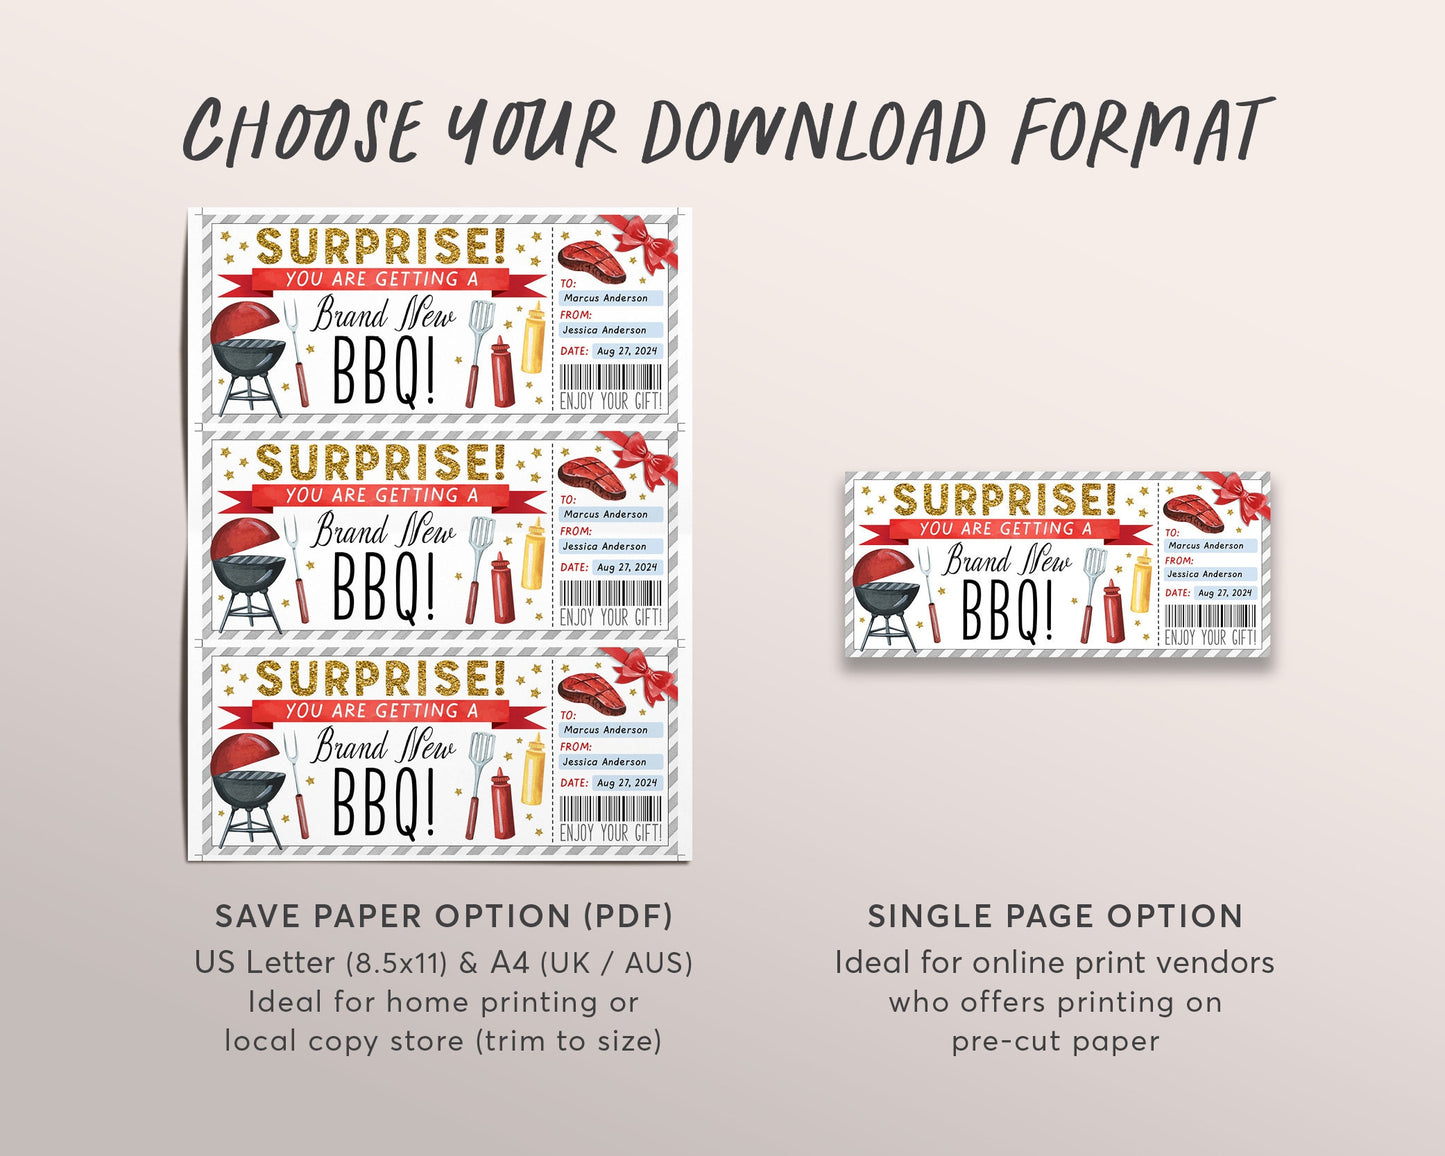 BBQ Voucher Gift Certificate Editable Template, Surprise Brand New BBQ Grill For Husband, Barbecue Dinner Meal Coupon Ticket Outdoor Cooking